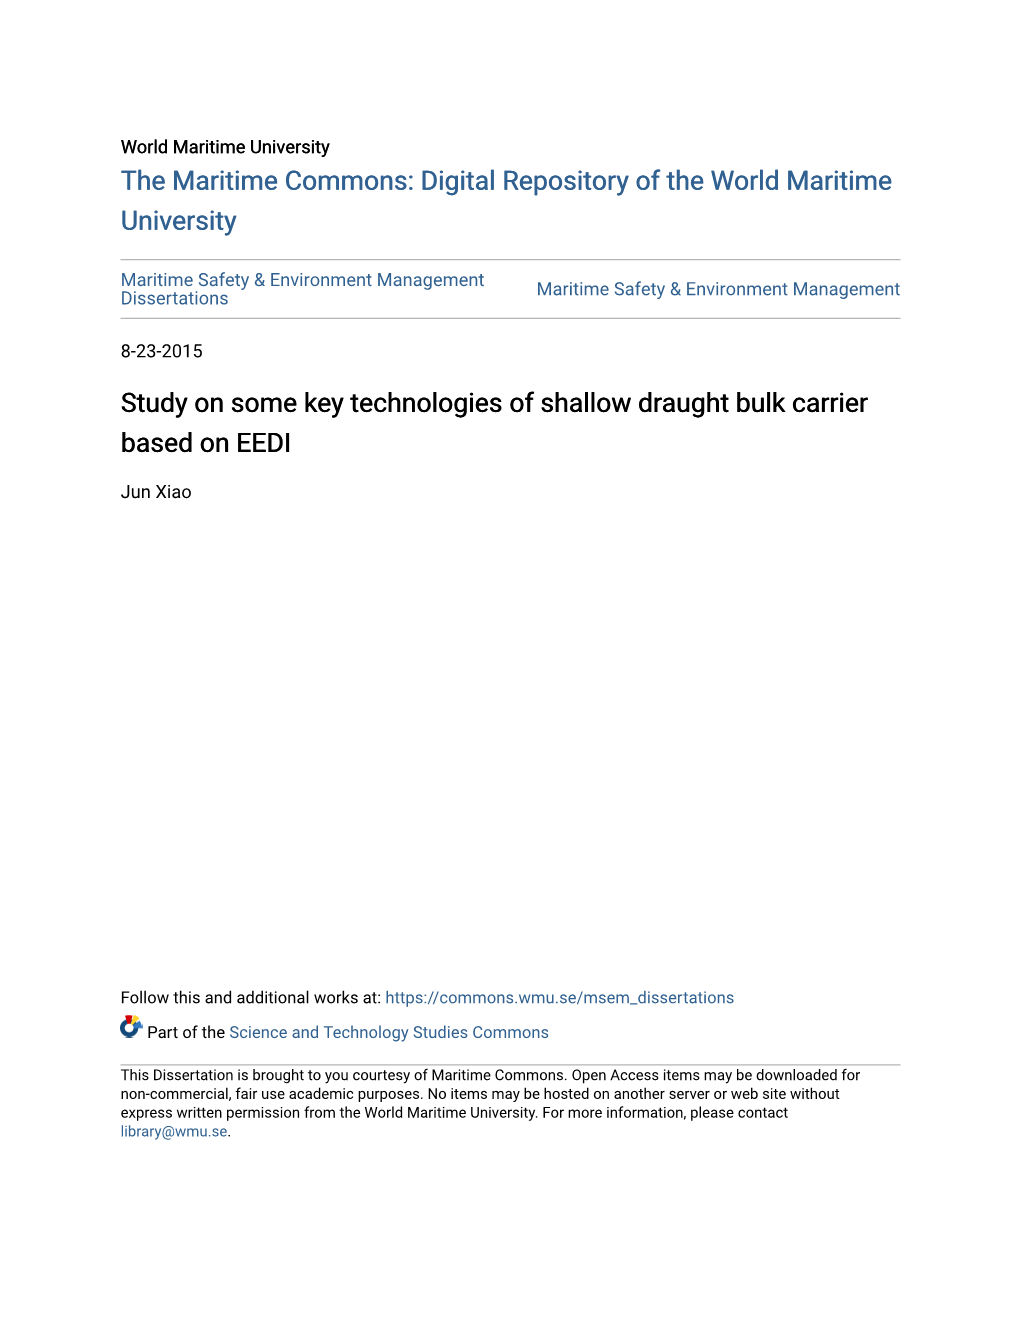 Study on Some Key Technologies of Shallow Draught Bulk Carrier Based on EEDI